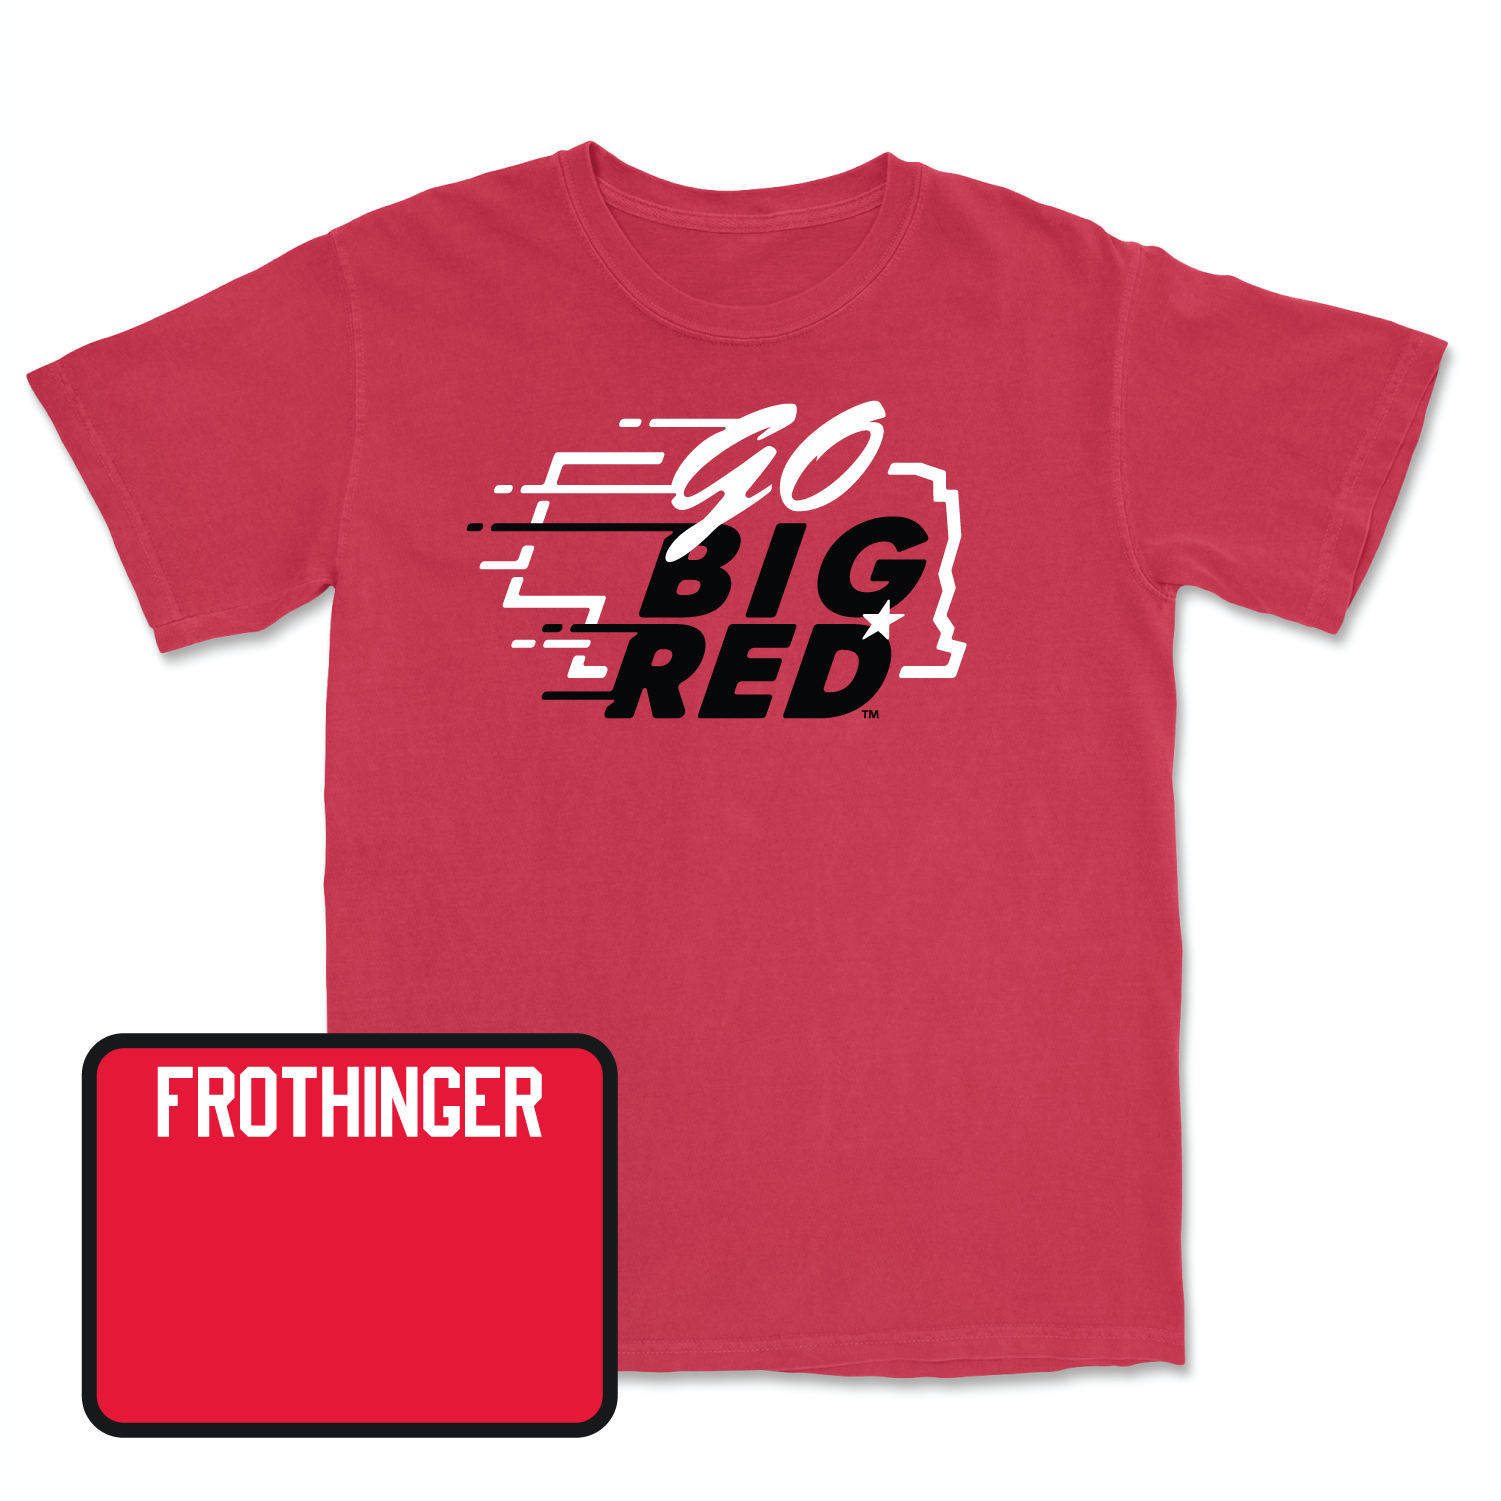 Red Wrestling GBR Tee 3X-Large / Tanner Frothinger | #141